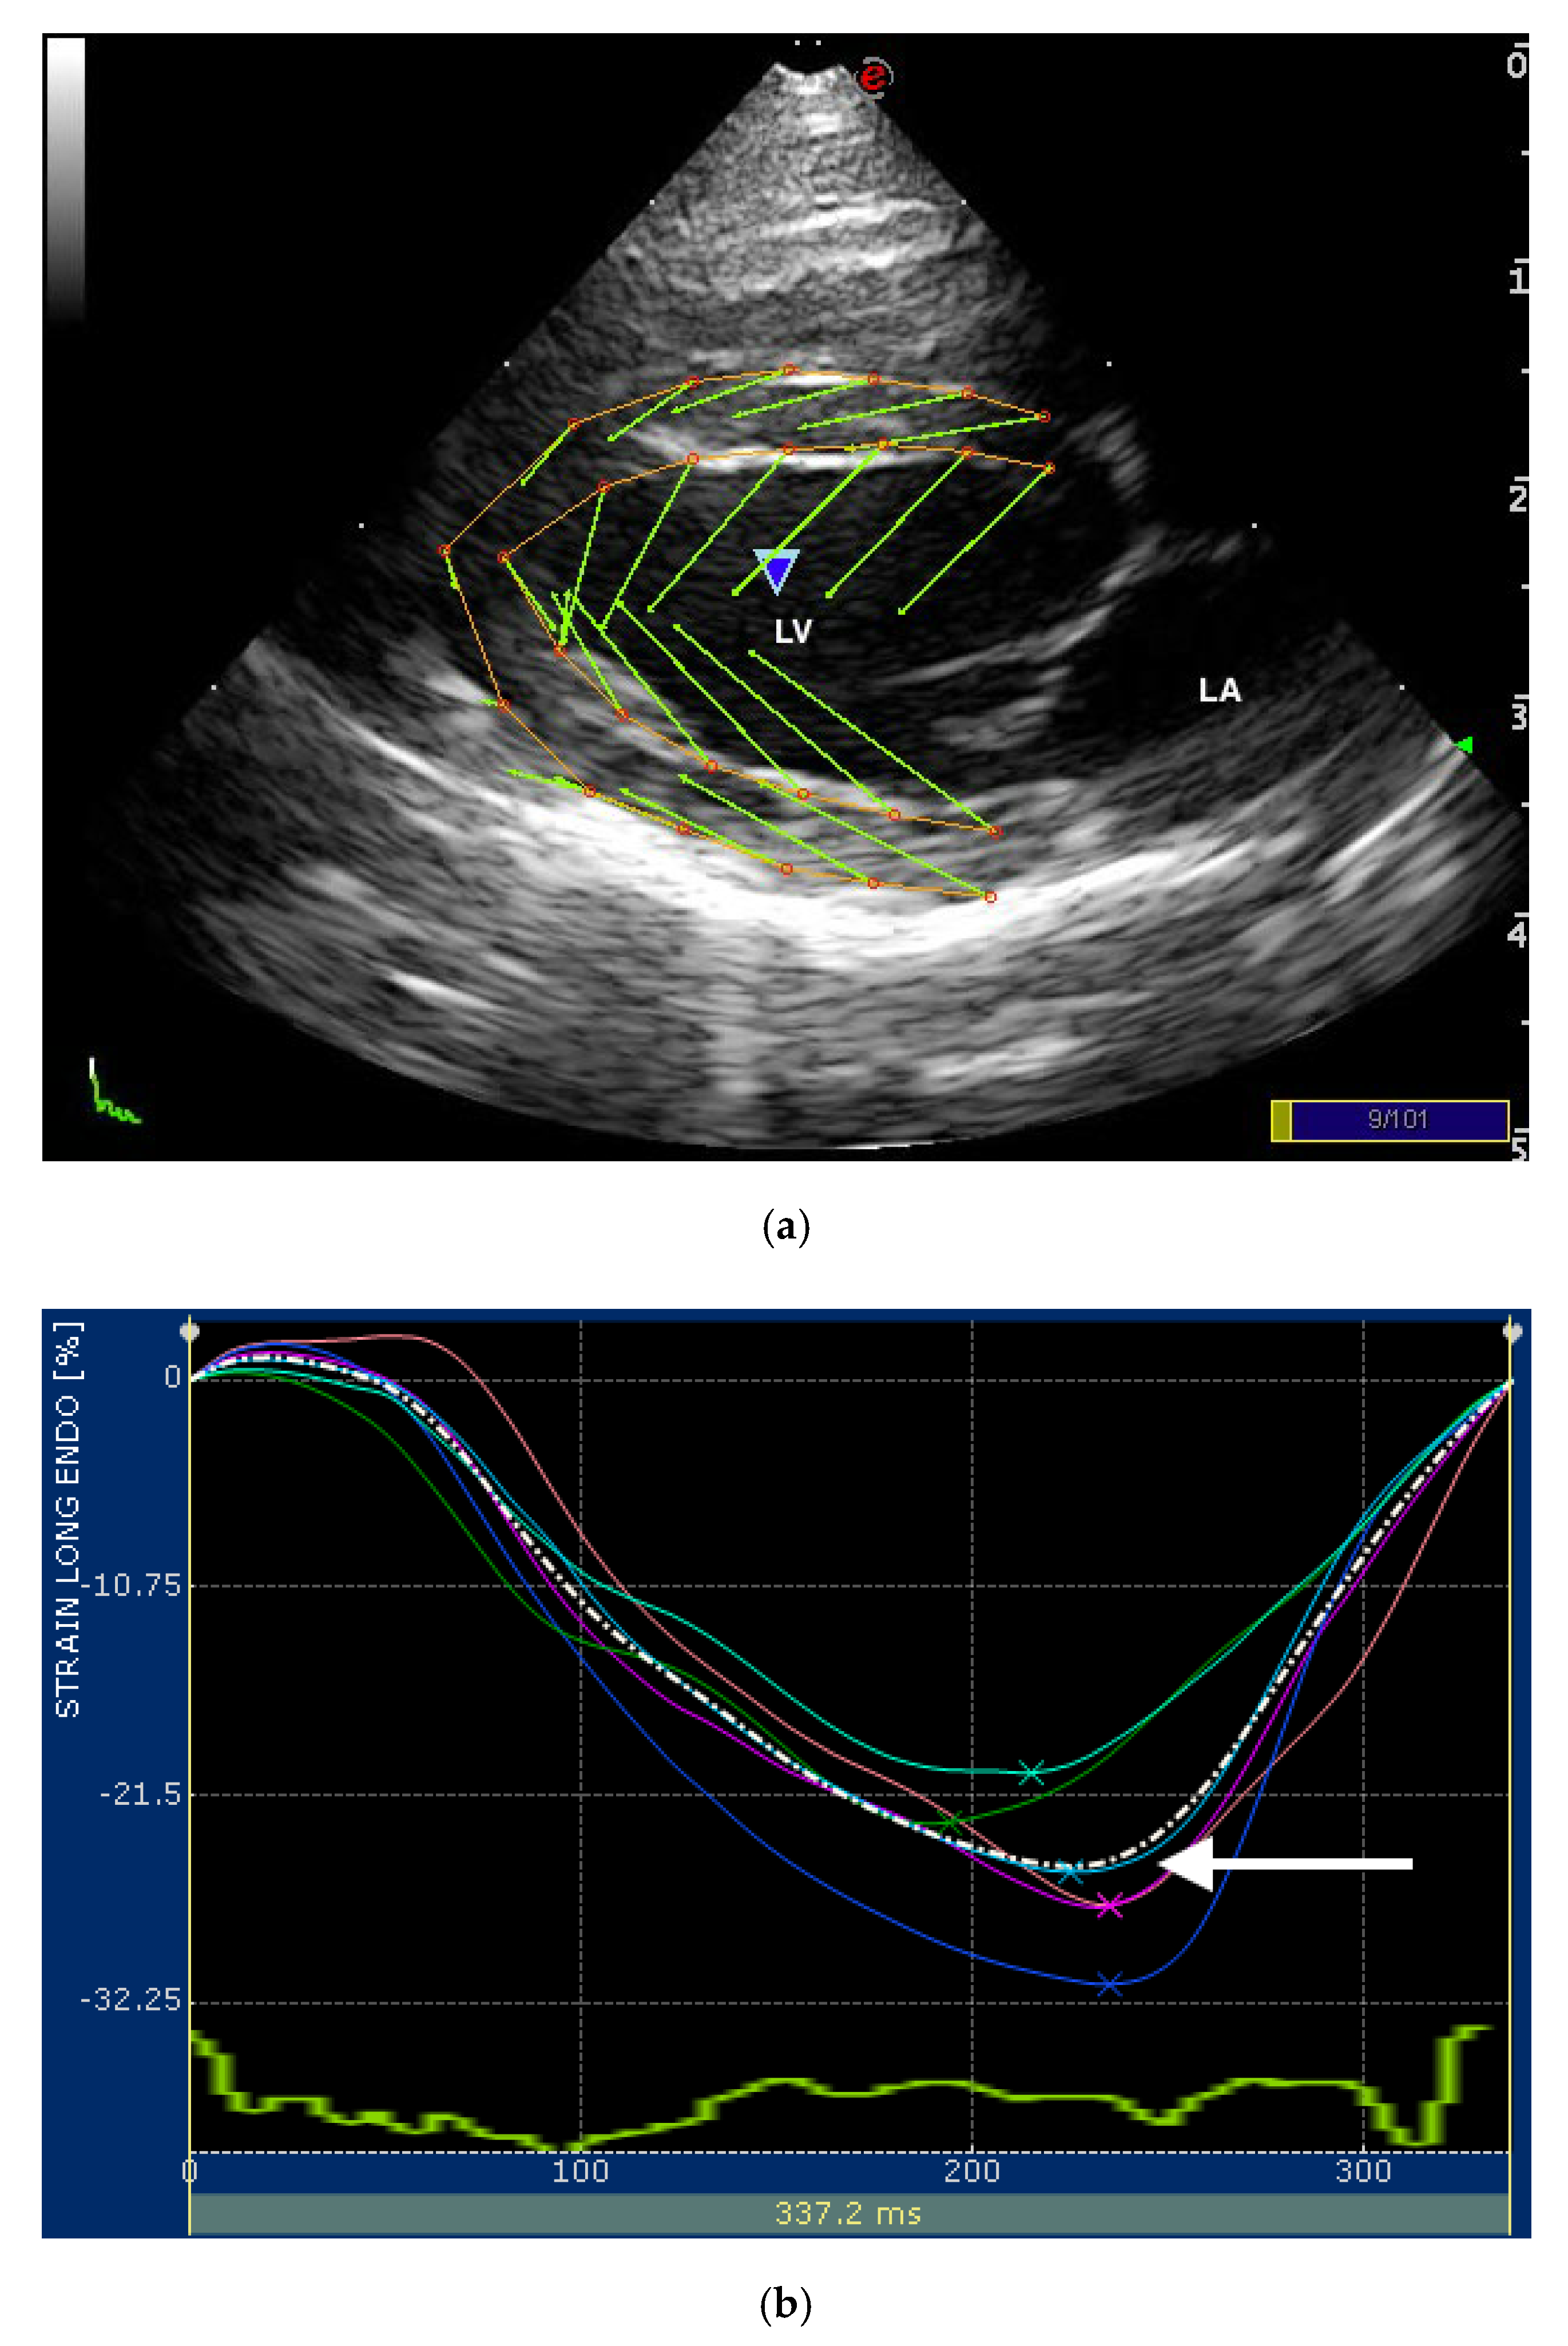 Second trimester ultrasound: reference values for two-dimensional speckle  tracking-derived longitudinal strain, strain rate and time to peak  deformation of the fetal heart.